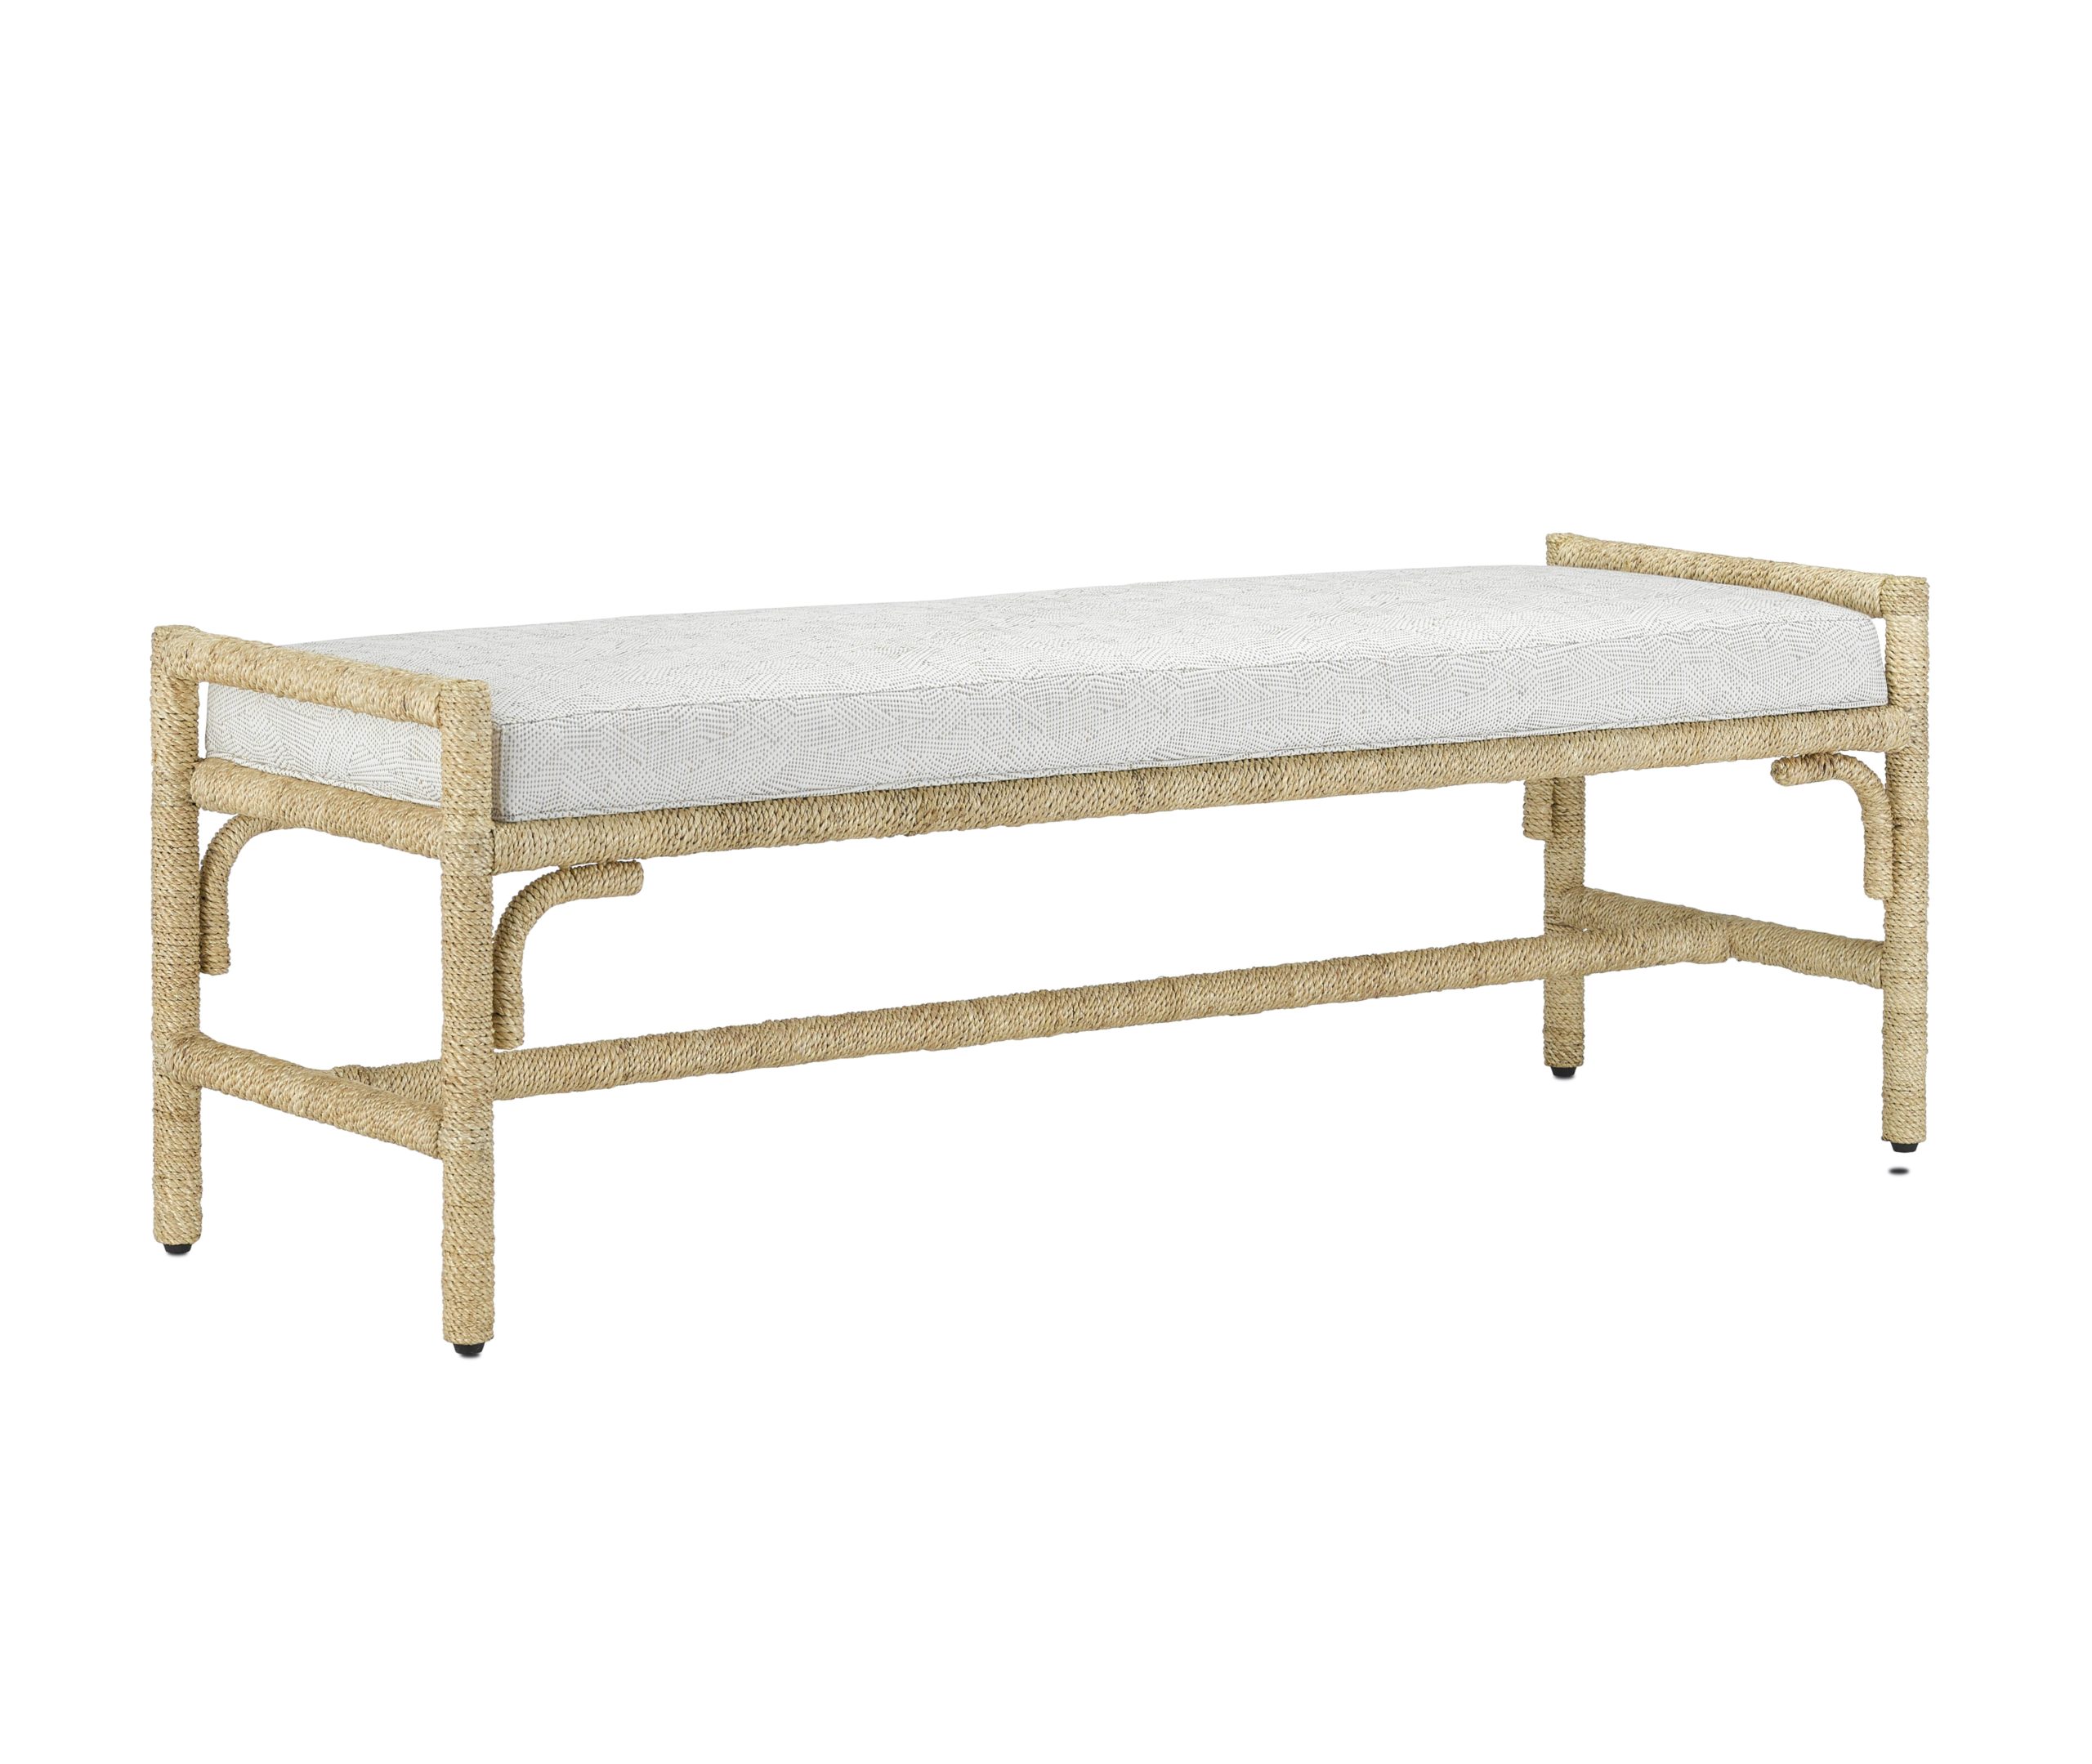 NYDC_WNWN_currey_and_co_products_olisa_pearl_bench_7000-1172_